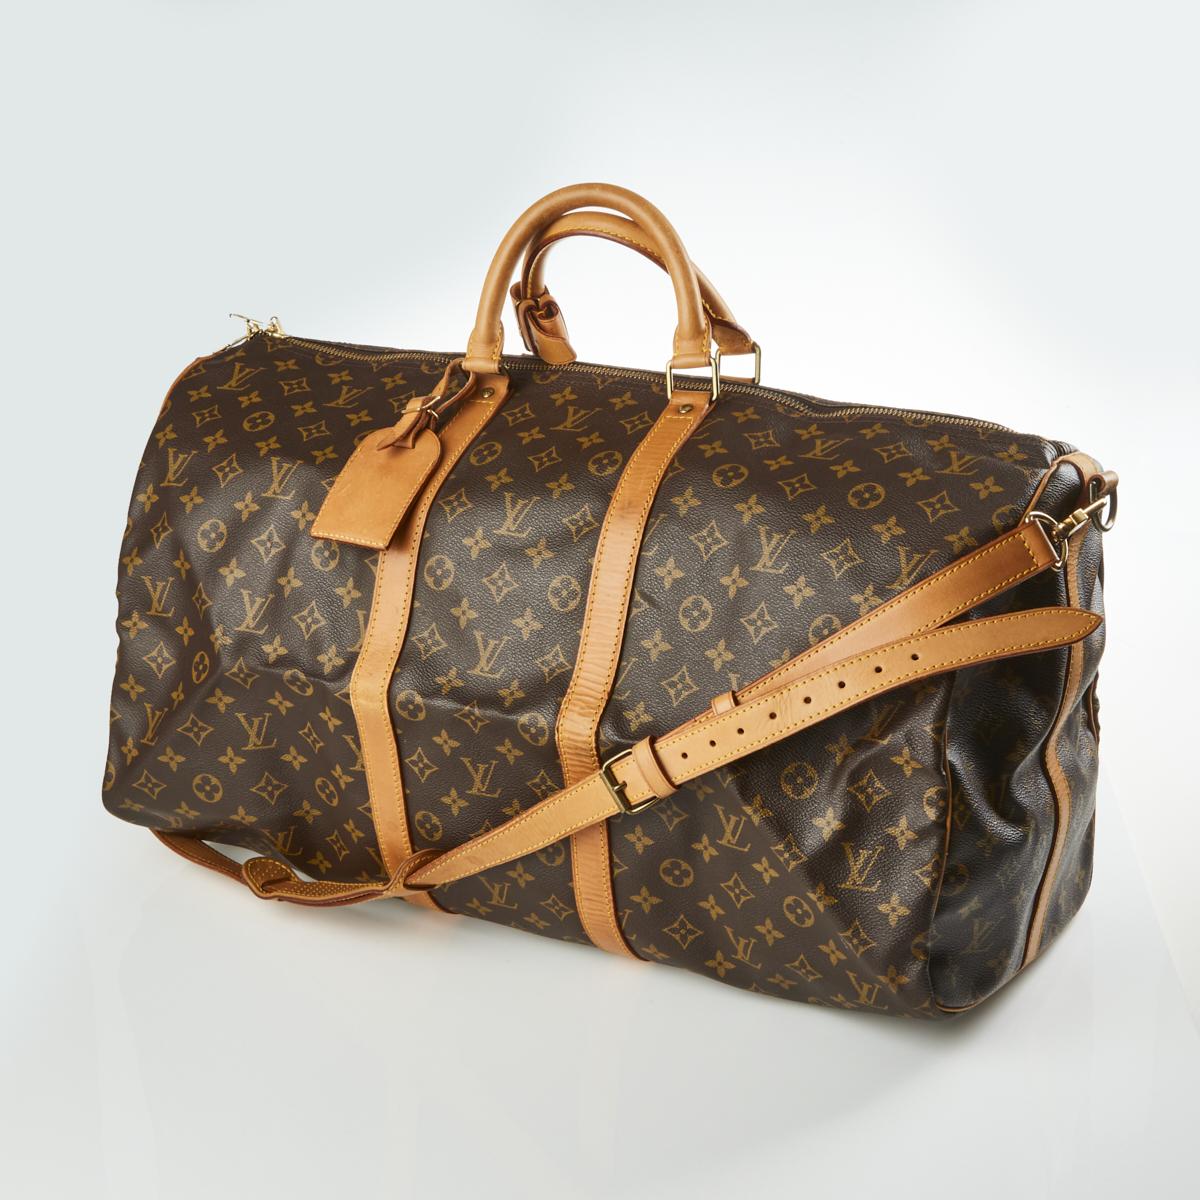 Sold at Auction: VINTAGE LOUIS VUITTON KEEPALL 45 & 55 DUFFEL BAGS